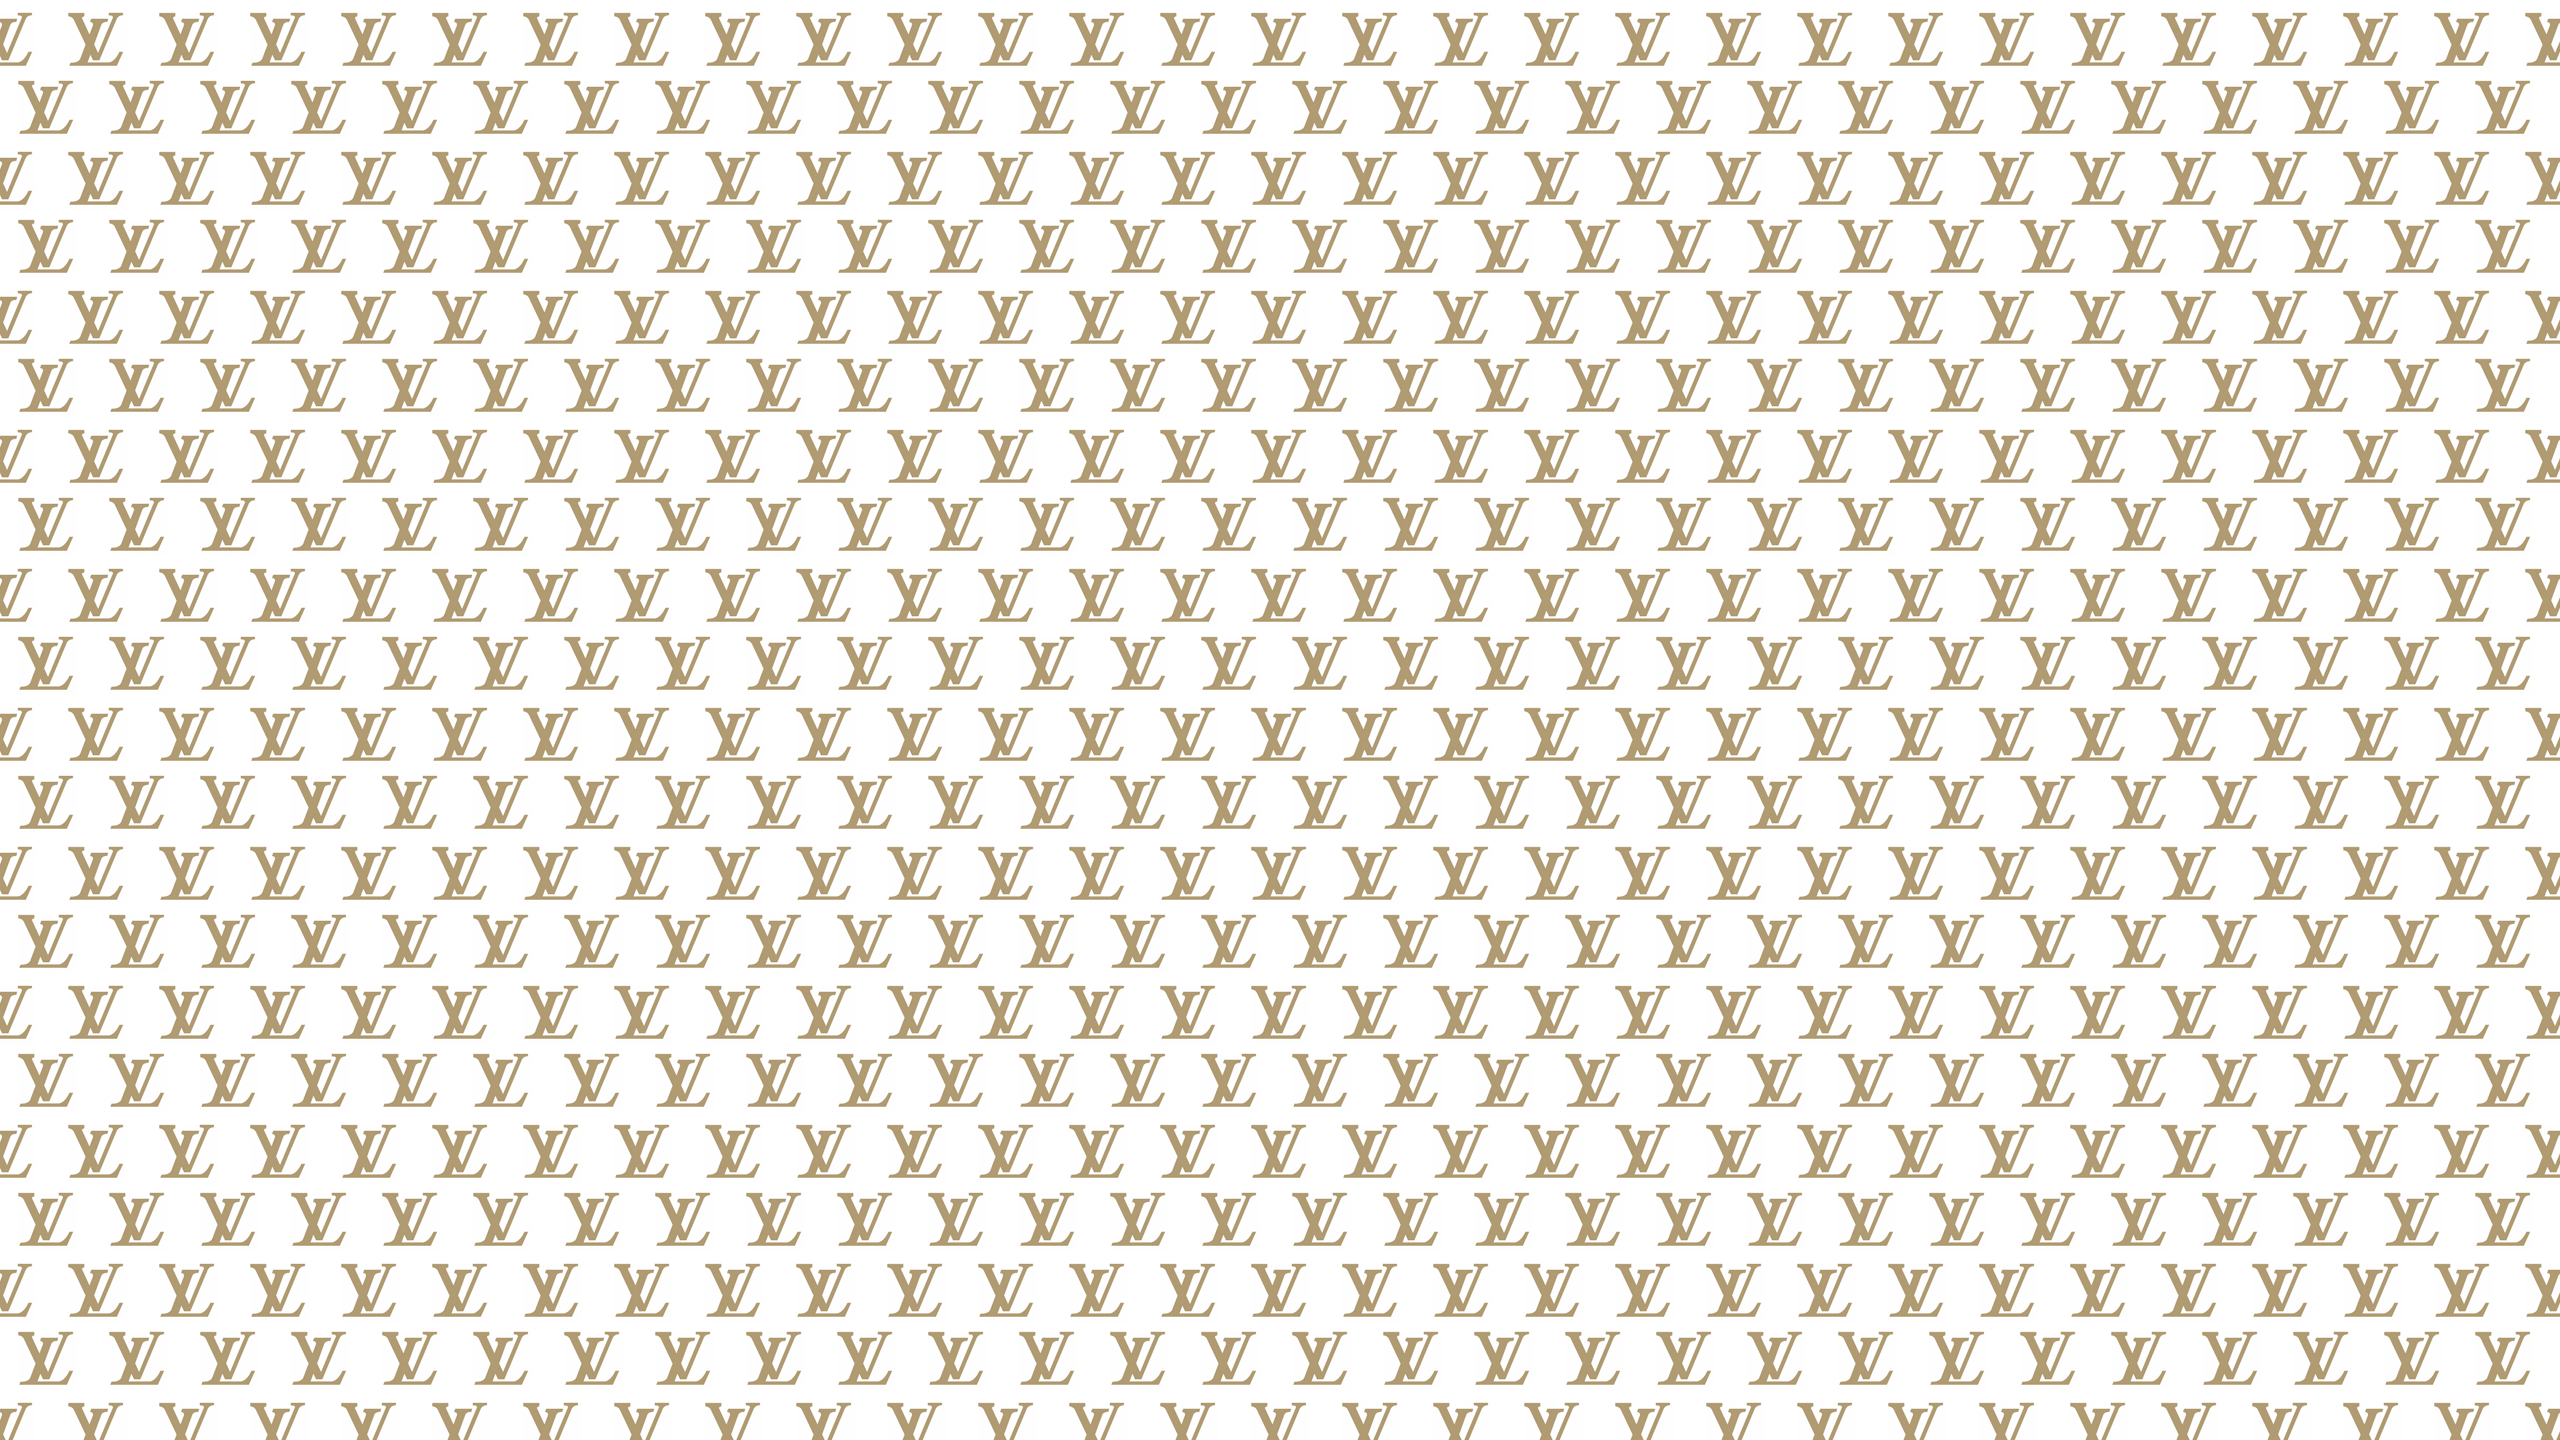 Gold Louis Vuitton Desktop Wallpaper Is Easy Just Save The